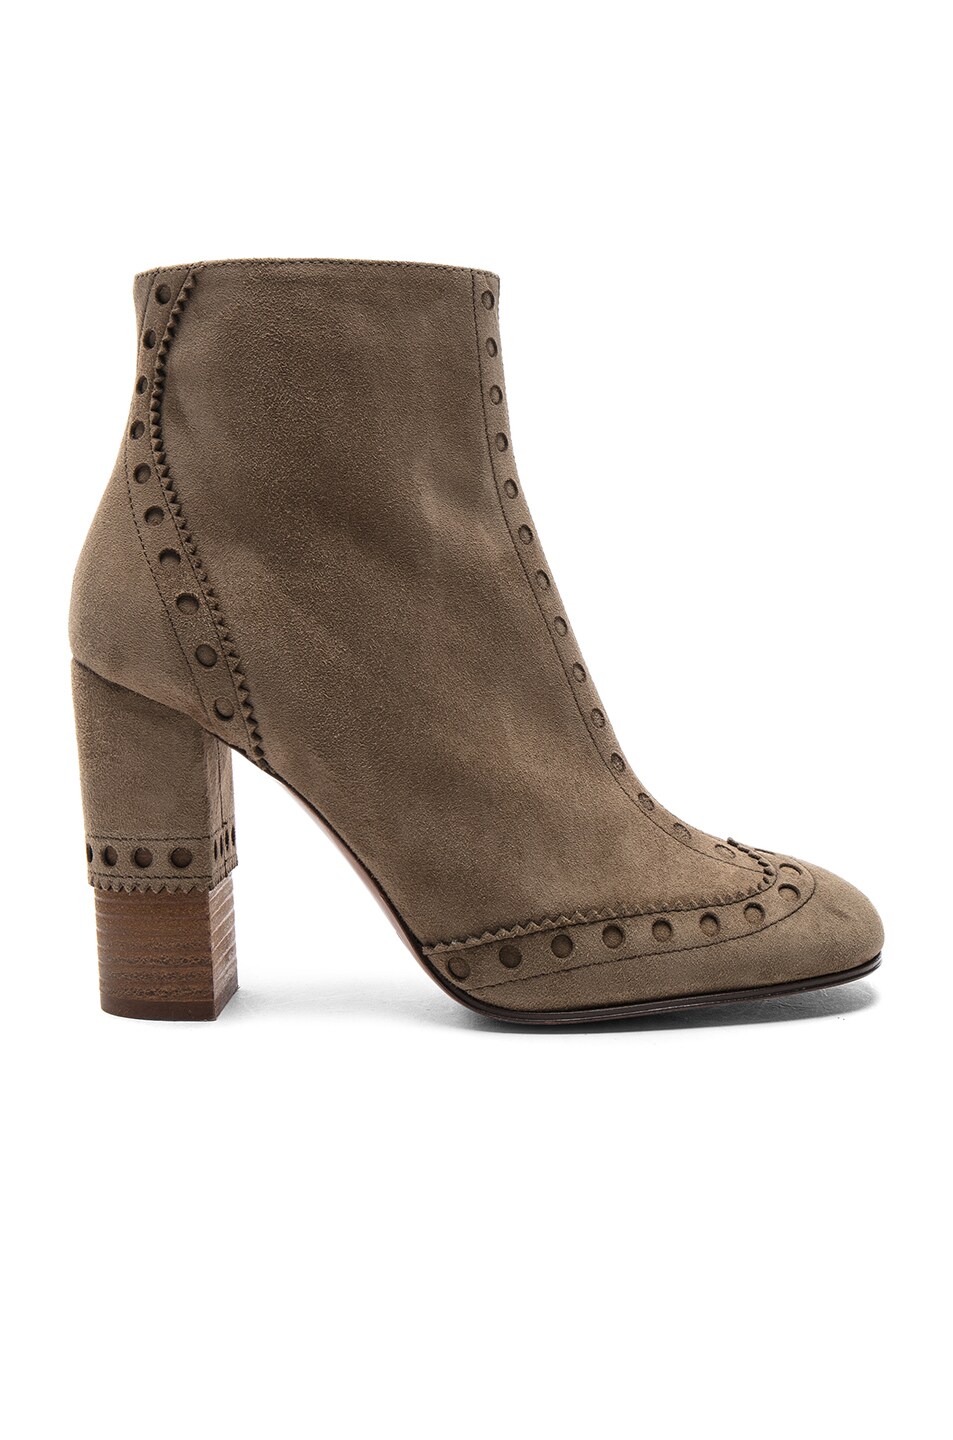 Image 1 of Chloe Perry Suede Heeled Boots in Maple Brown